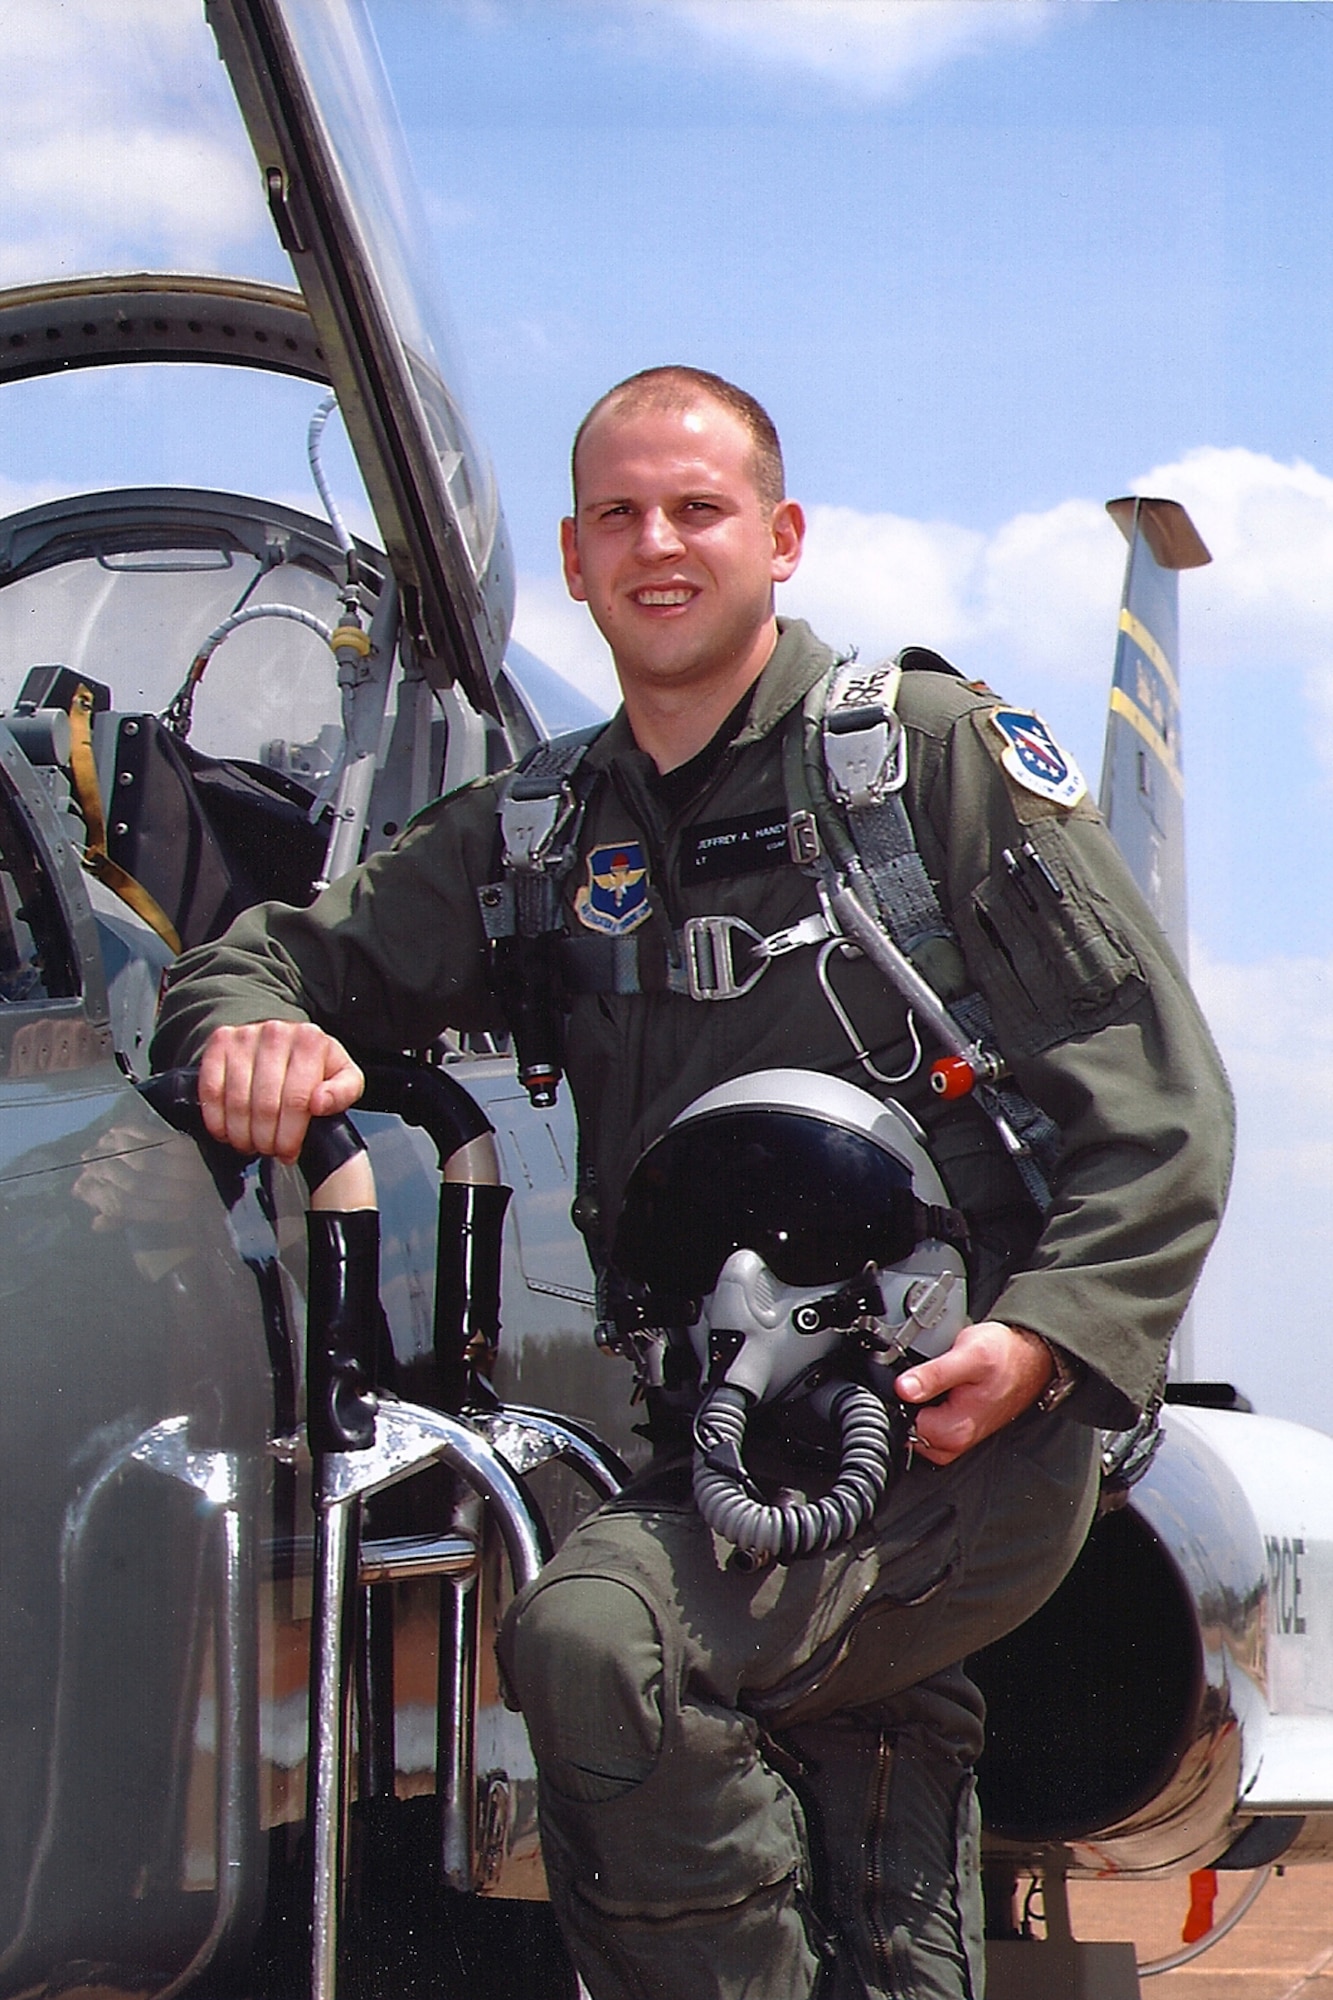 JOINT BASE ELMENDORF-RICHARDSON, Alaska - A memorial service is planned for Monday in Hangar One, 11551 Slammer Avenue, at 3:25 p.m., to honor the memory of Capt. Jeffrey Haney, 525th Fighter Squadron. (Courtesy Photo)